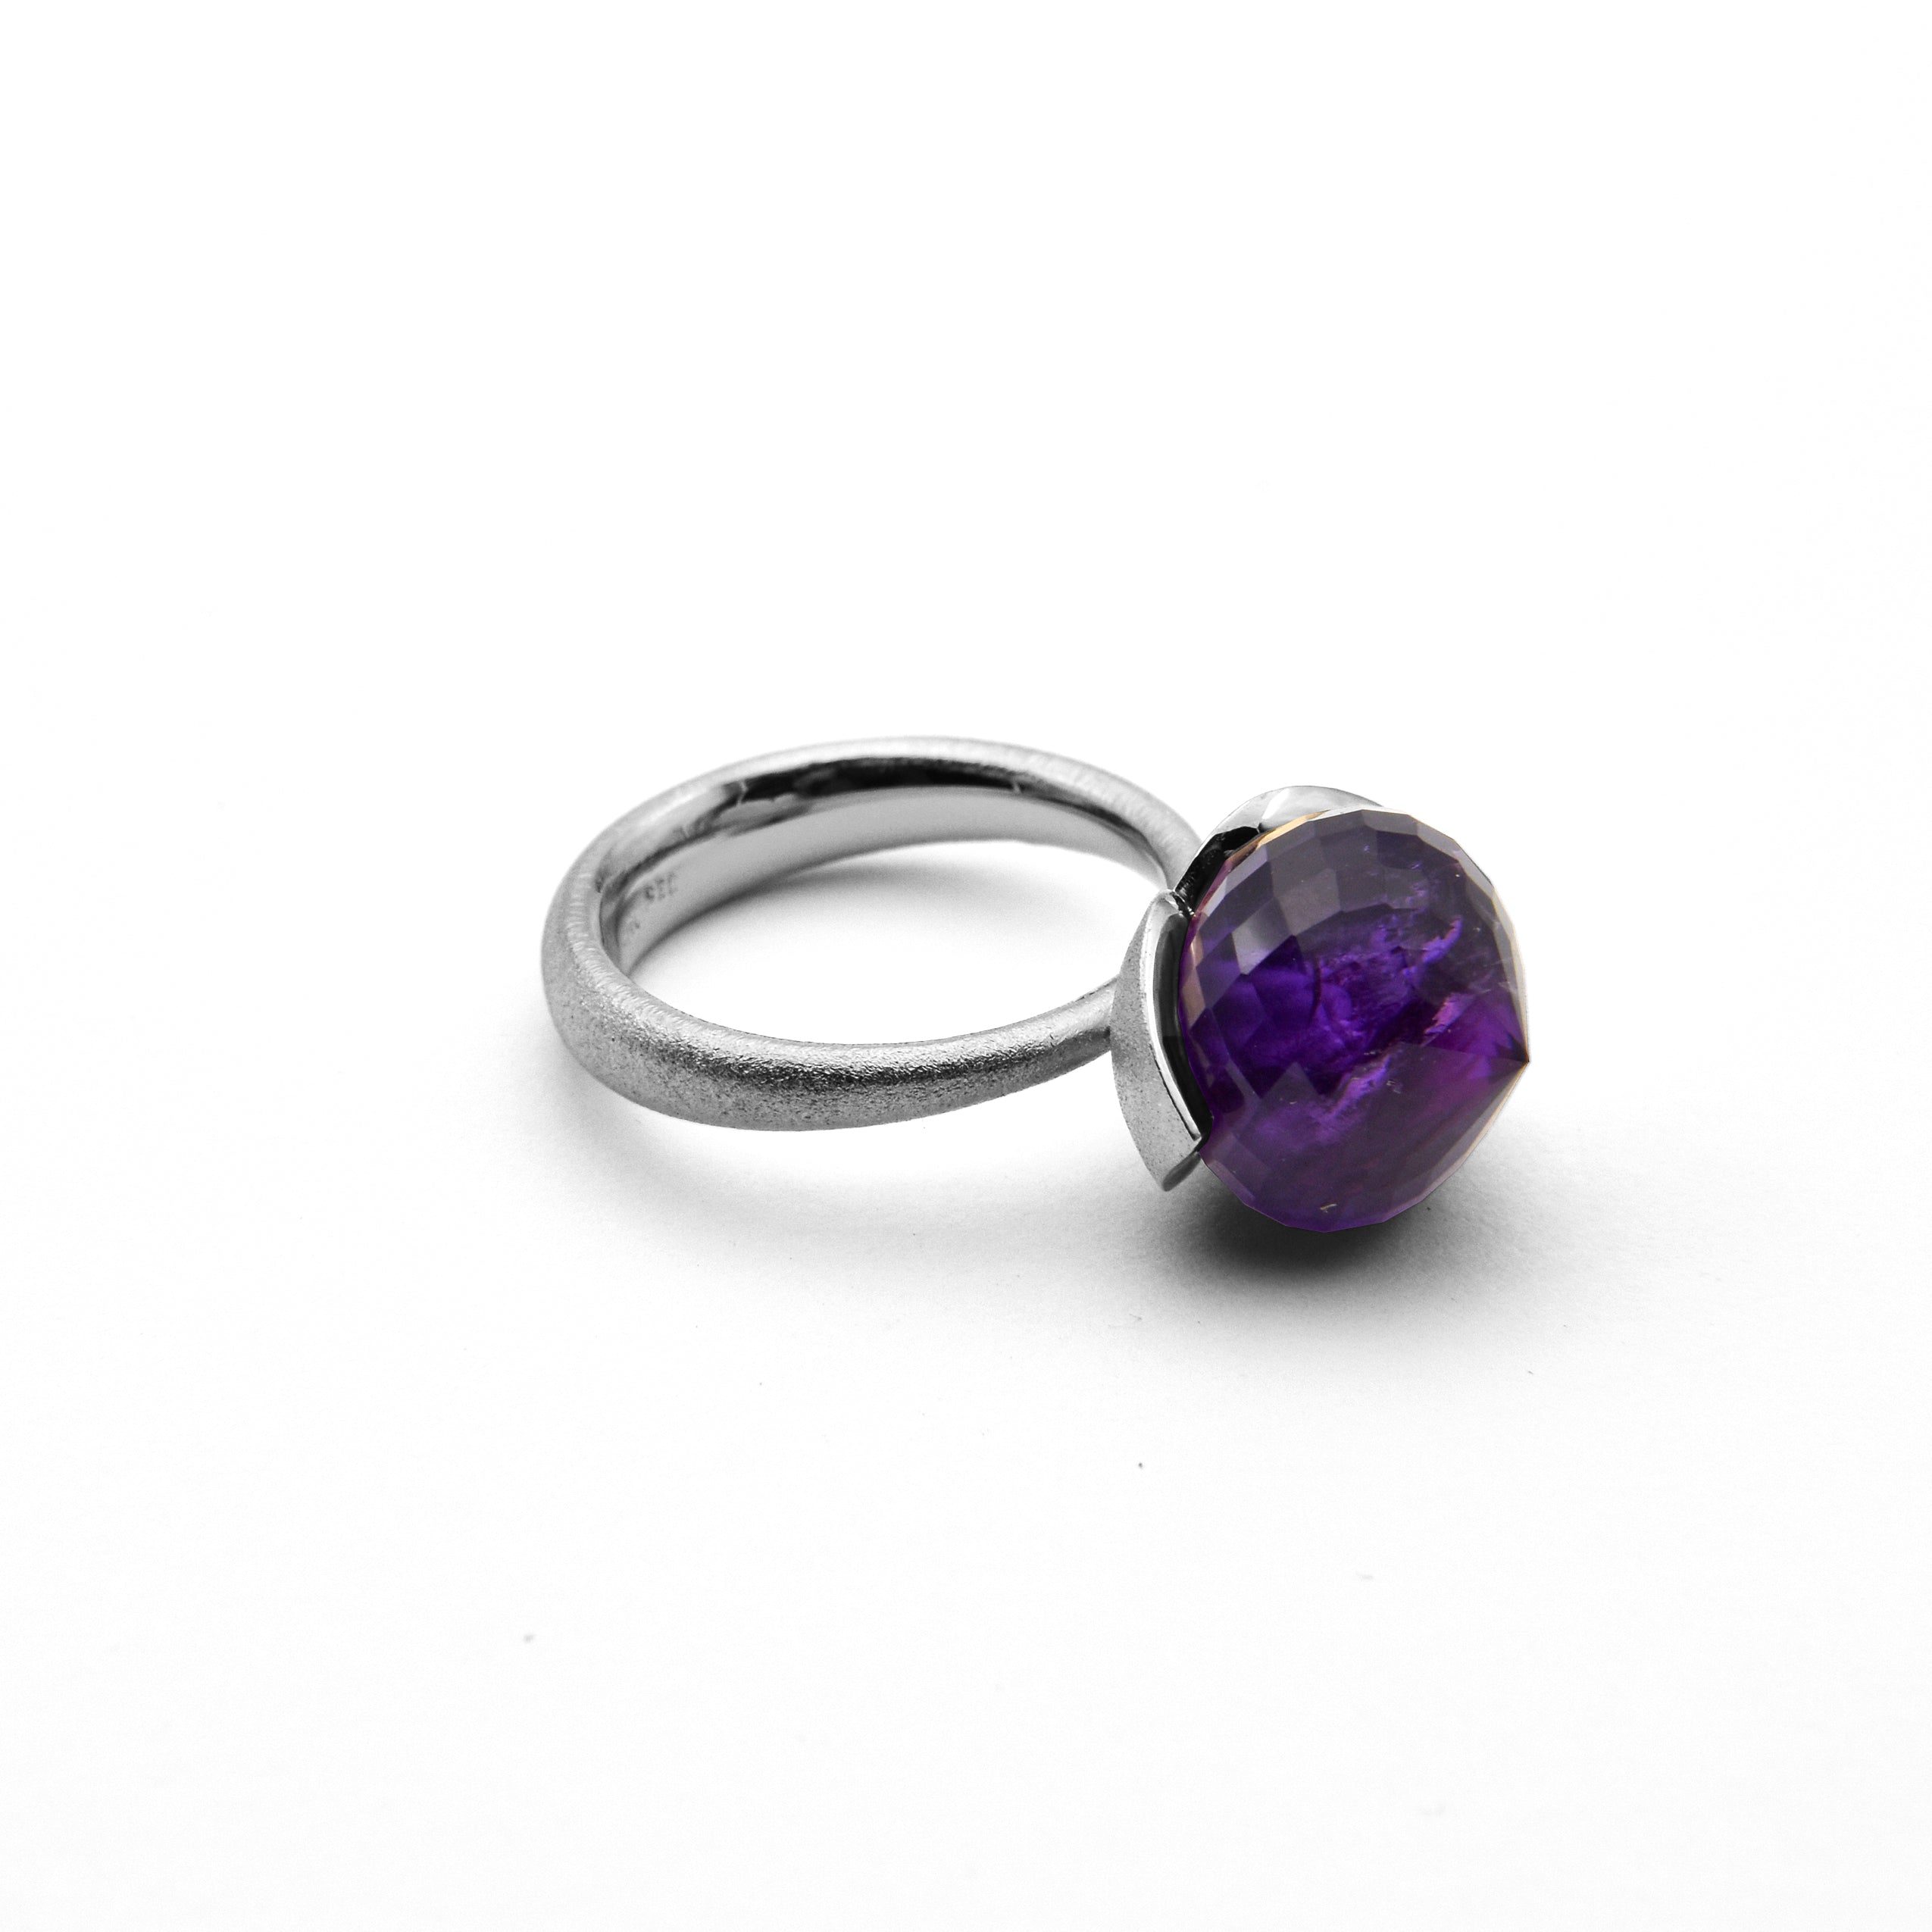 Dolce ring "big" with amethyst 925/-